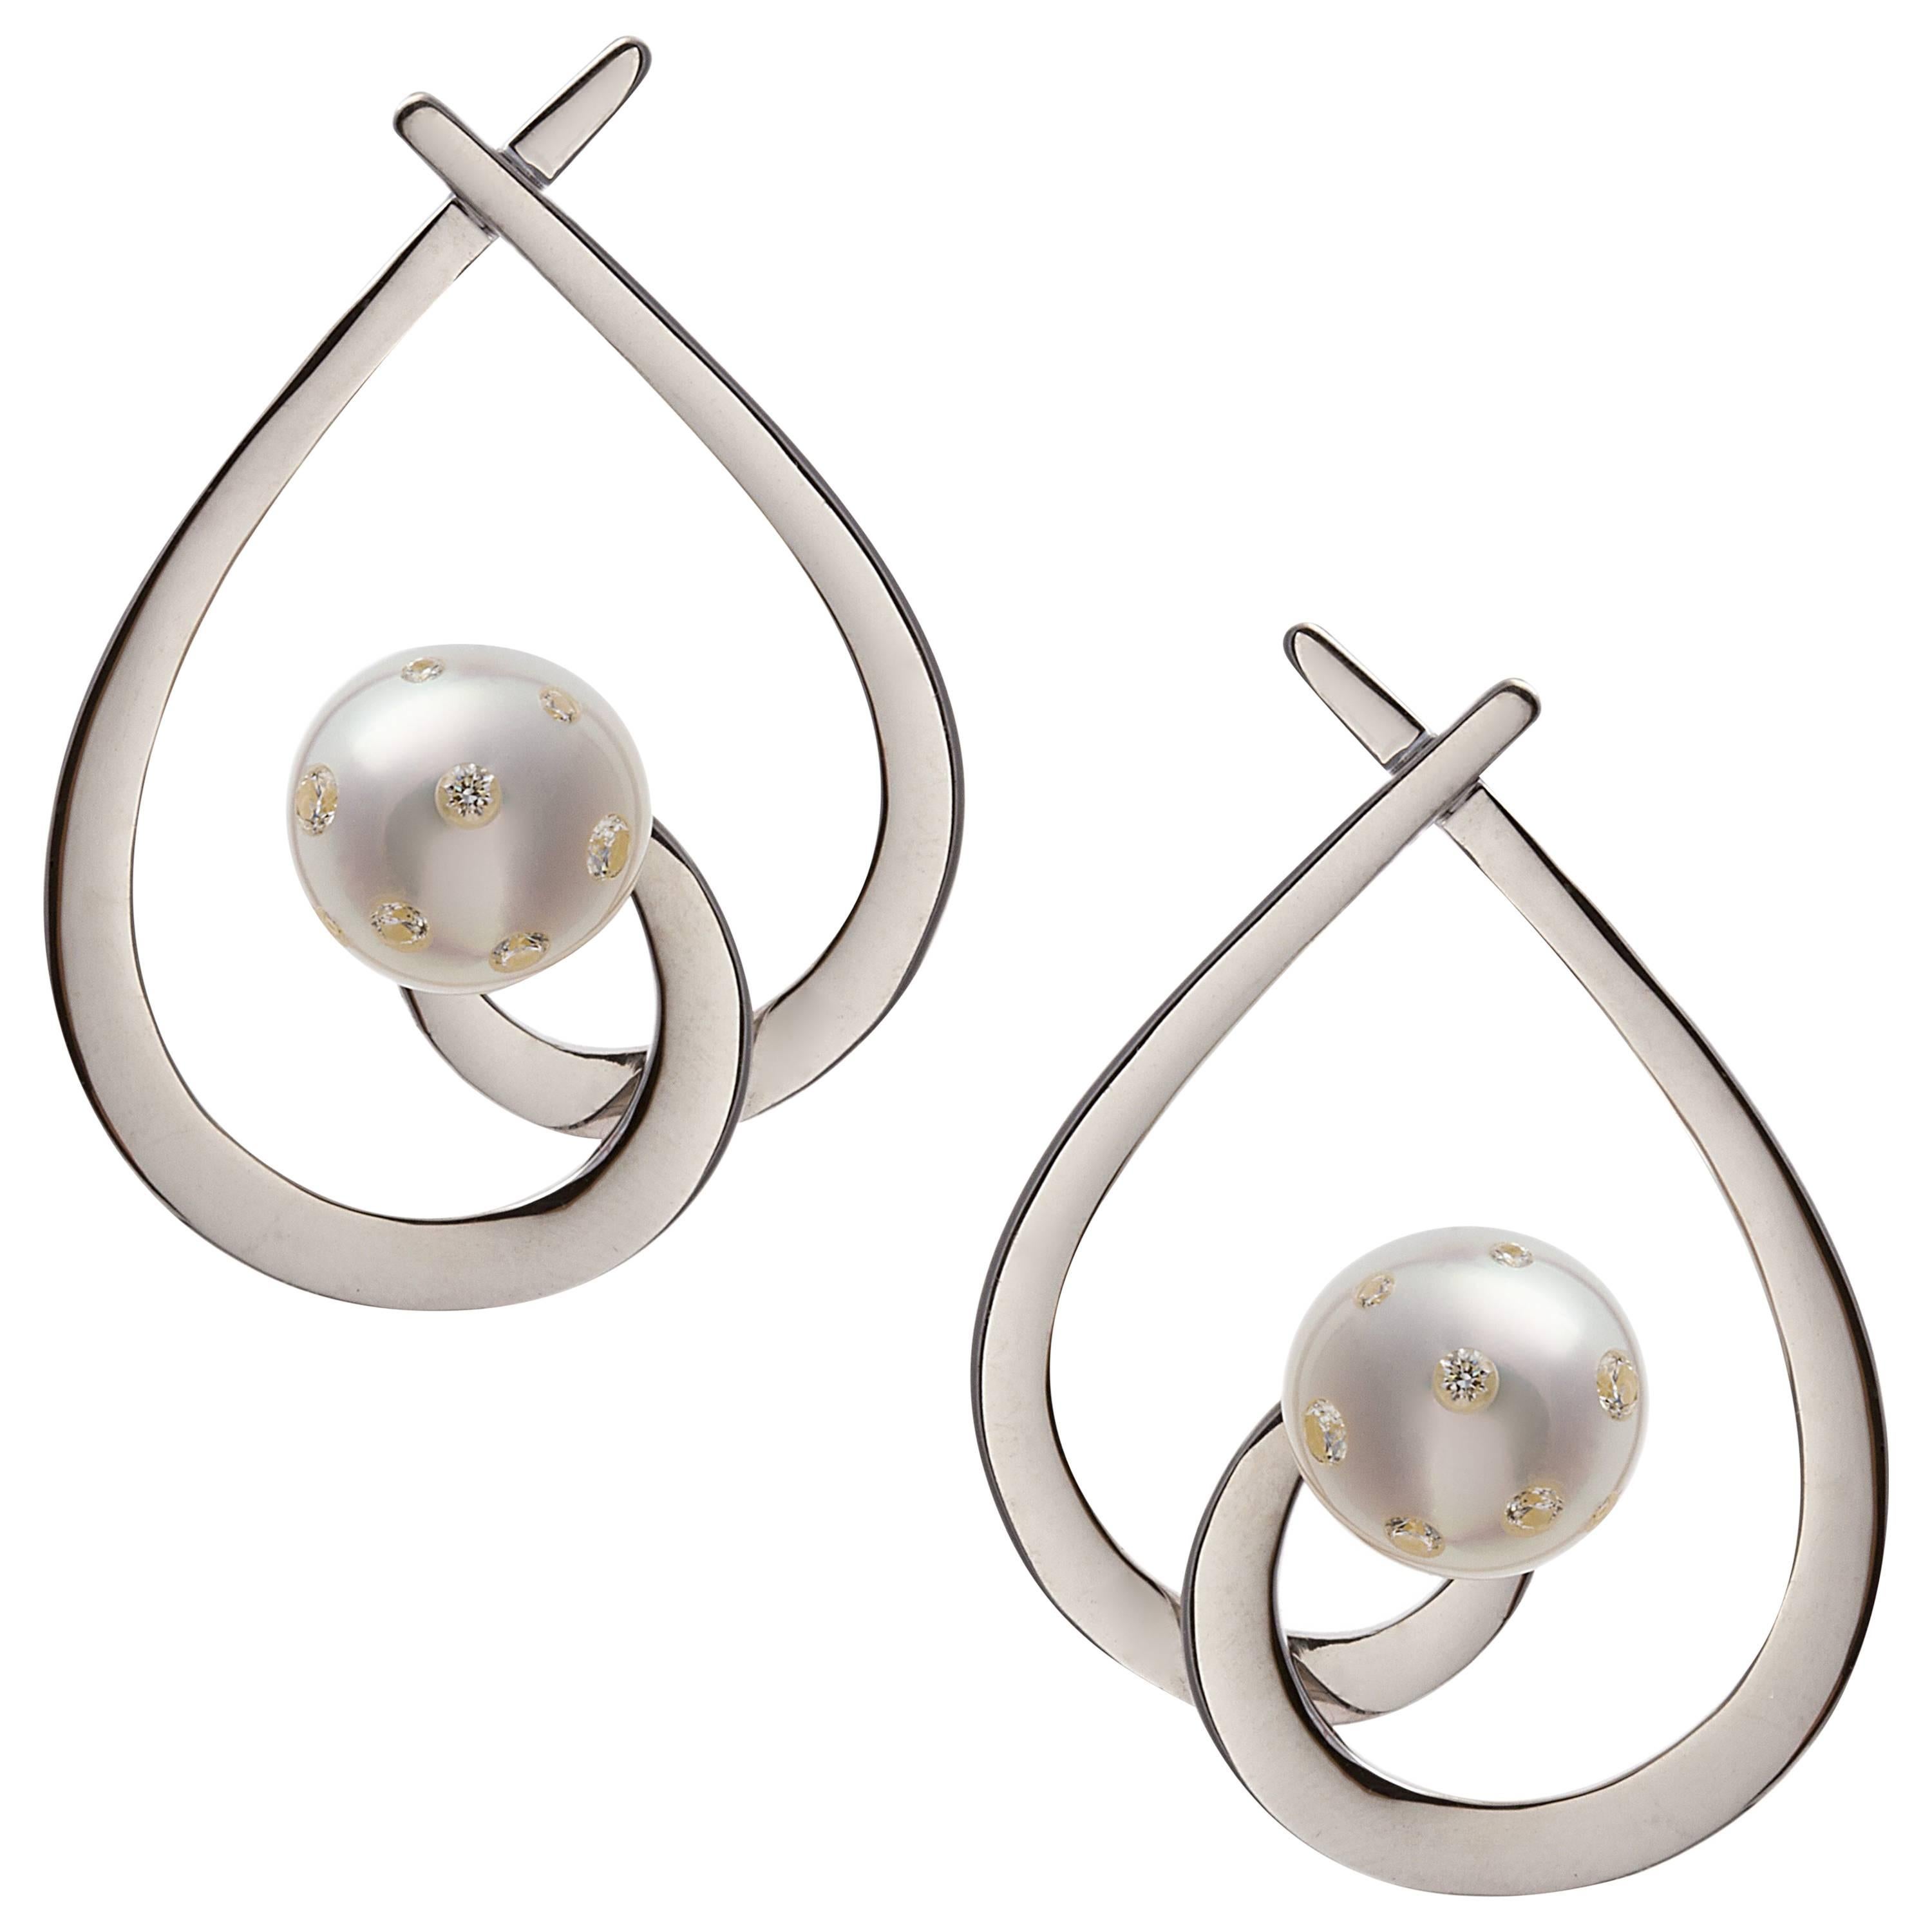 Lust Pearls Aria Earrings South Sea Pearls 0.32 Carat White Diamonds For Sale